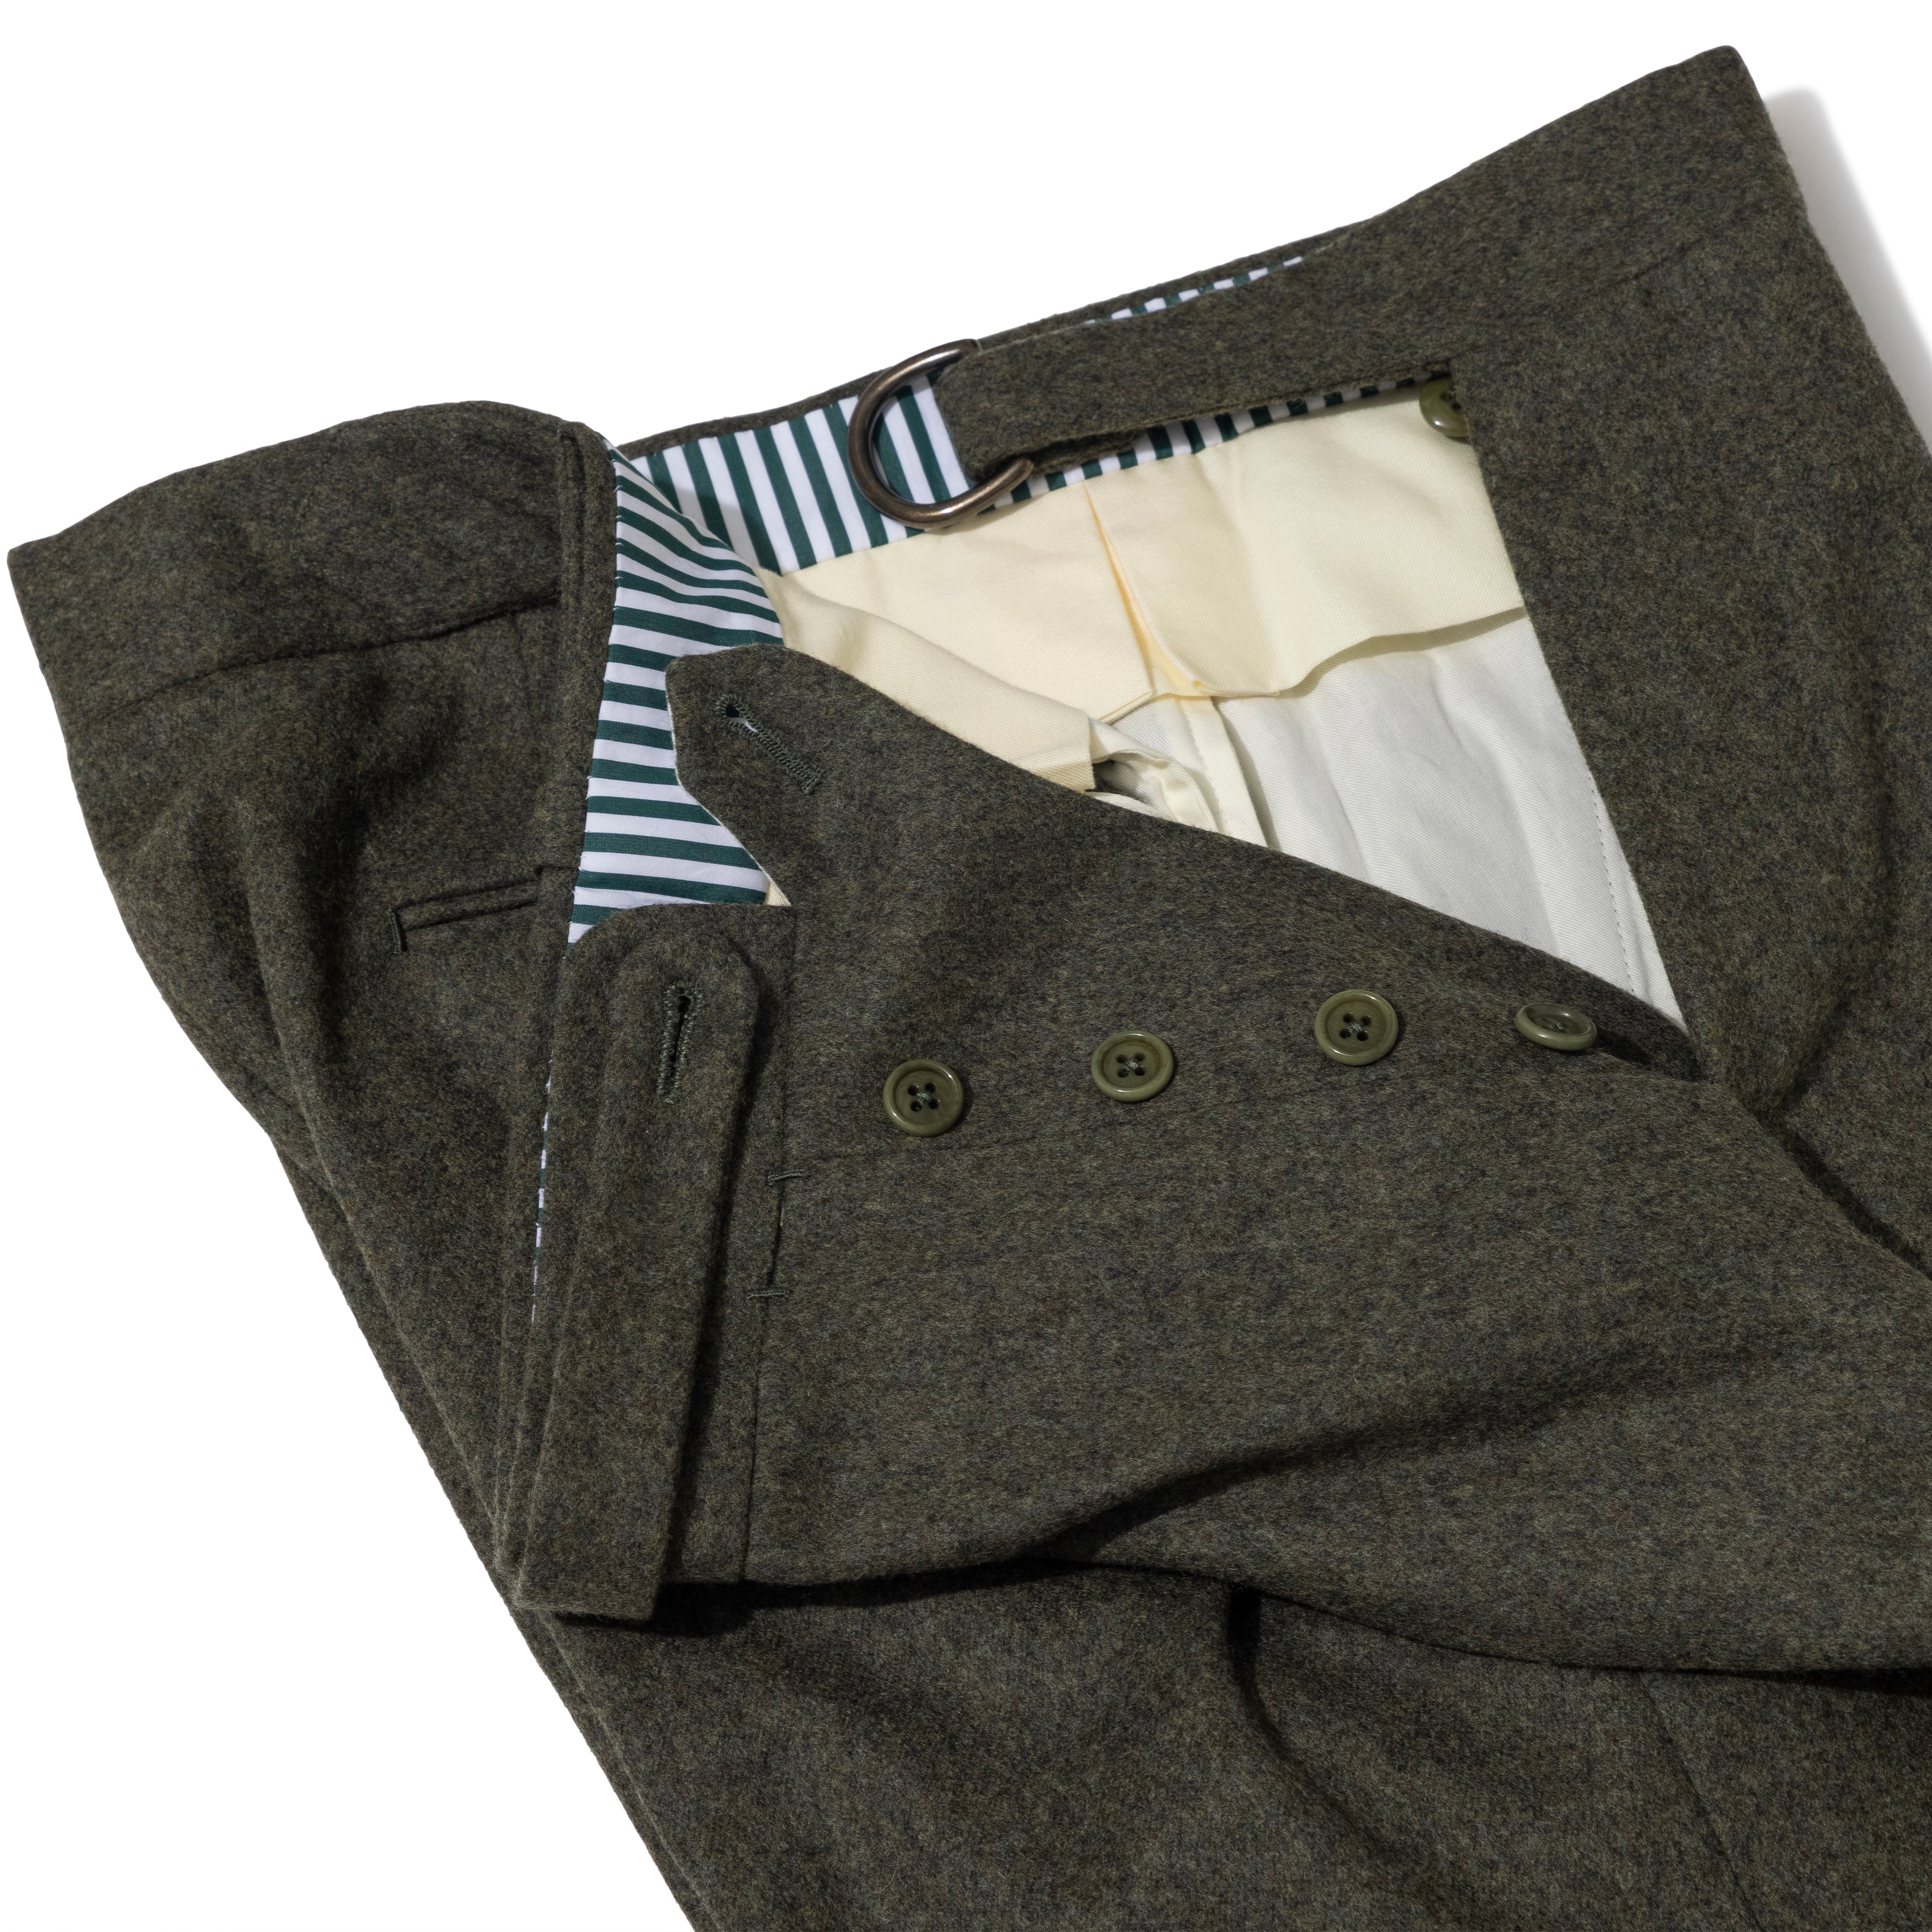 Palazzi Flannel PA1 Trousers - The Armoury